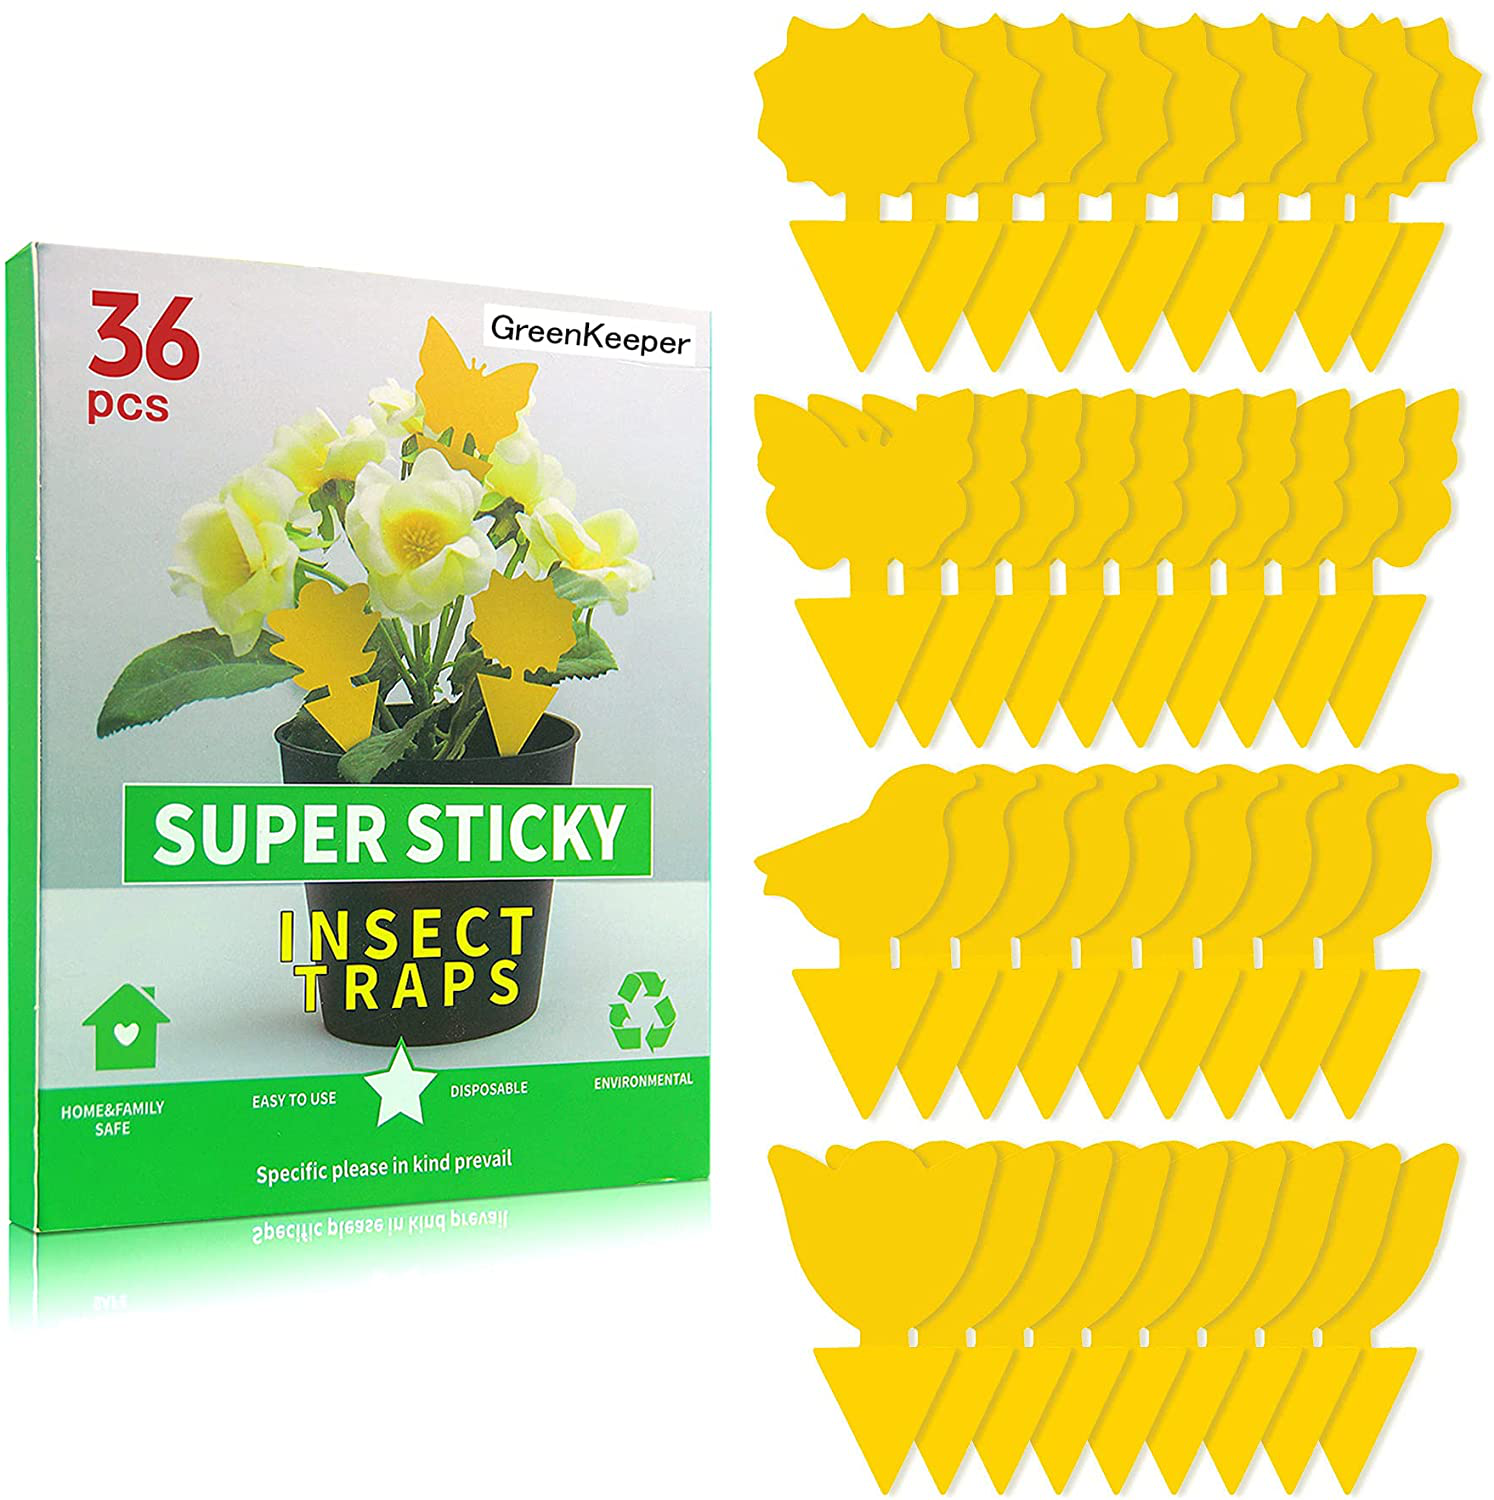 36 Pcs Sticky Traps for Fruit Fly, Whitefly, Fungus Gnat, Mosquito and Bug, Yellow Sticky Insect Catcher Traps for Indoor/Outdoor/Kitchen, Extremely Sticky Fly Trap, Non-Toxic, 4 Shapes